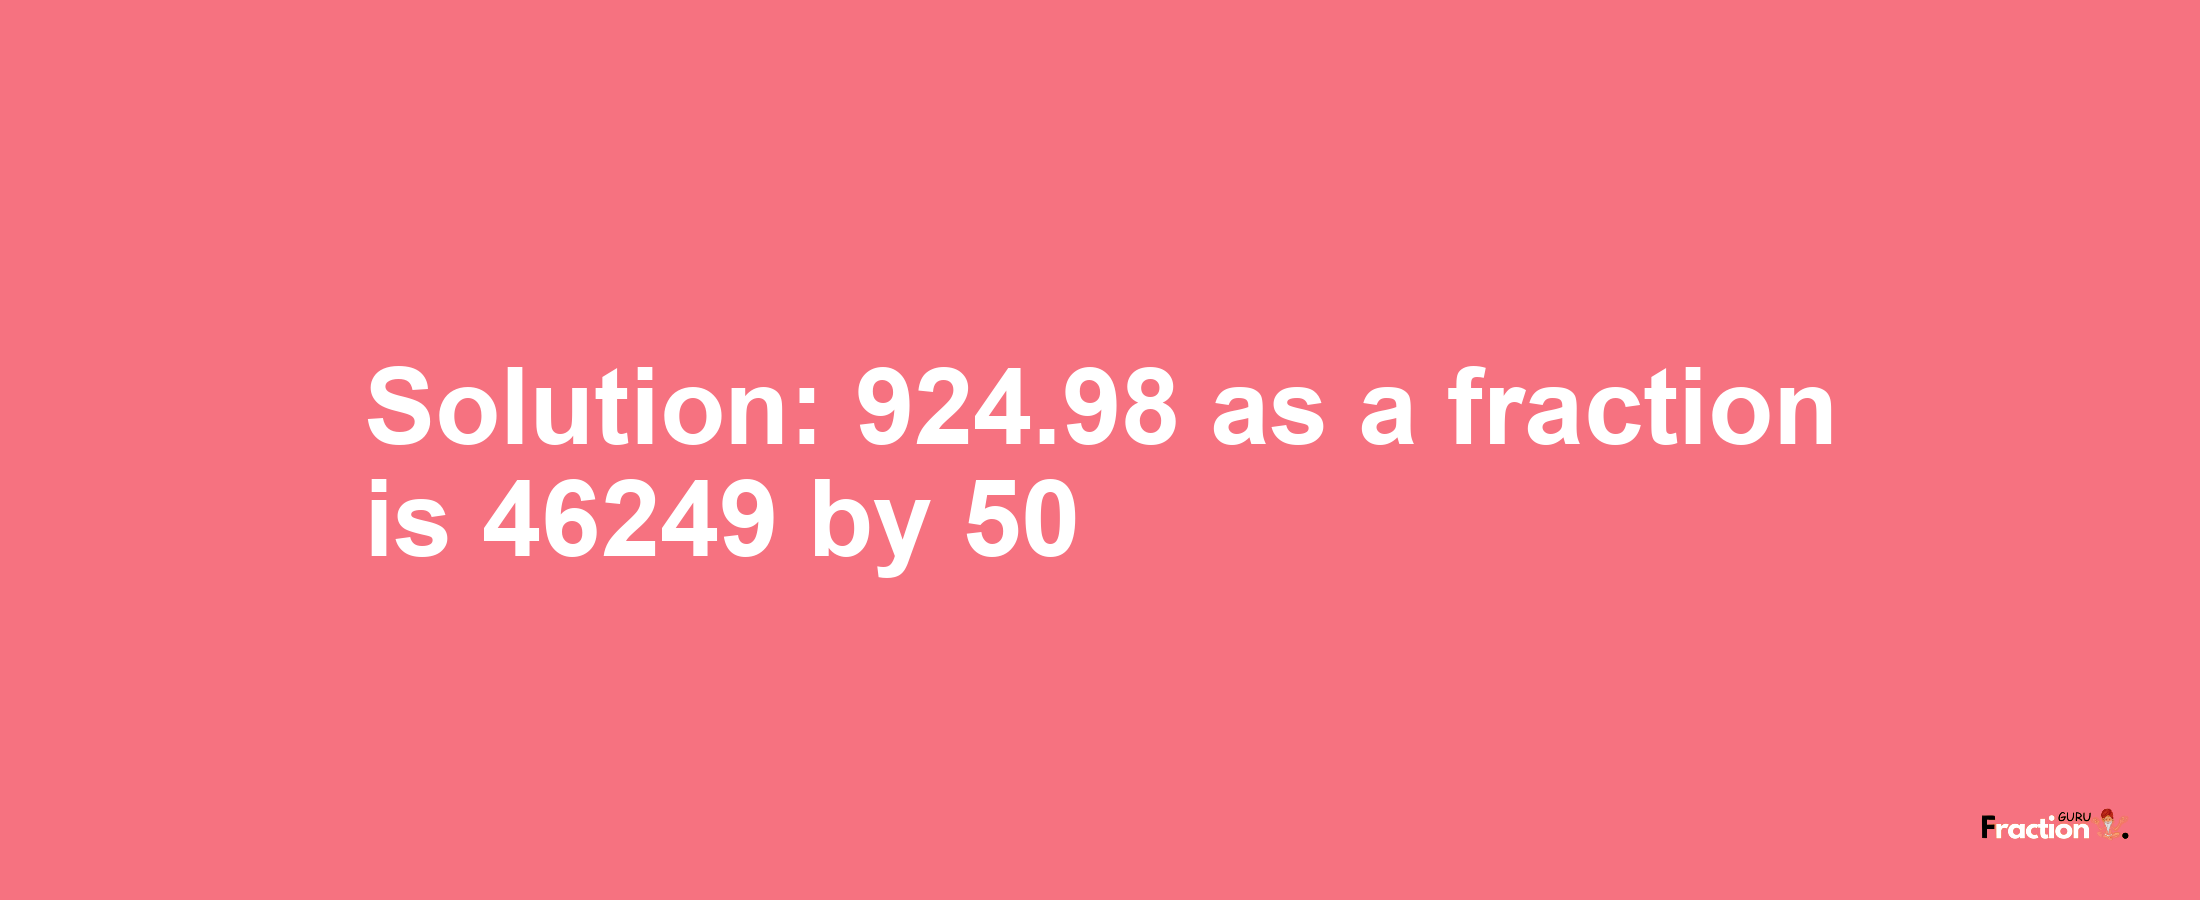 Solution:924.98 as a fraction is 46249/50